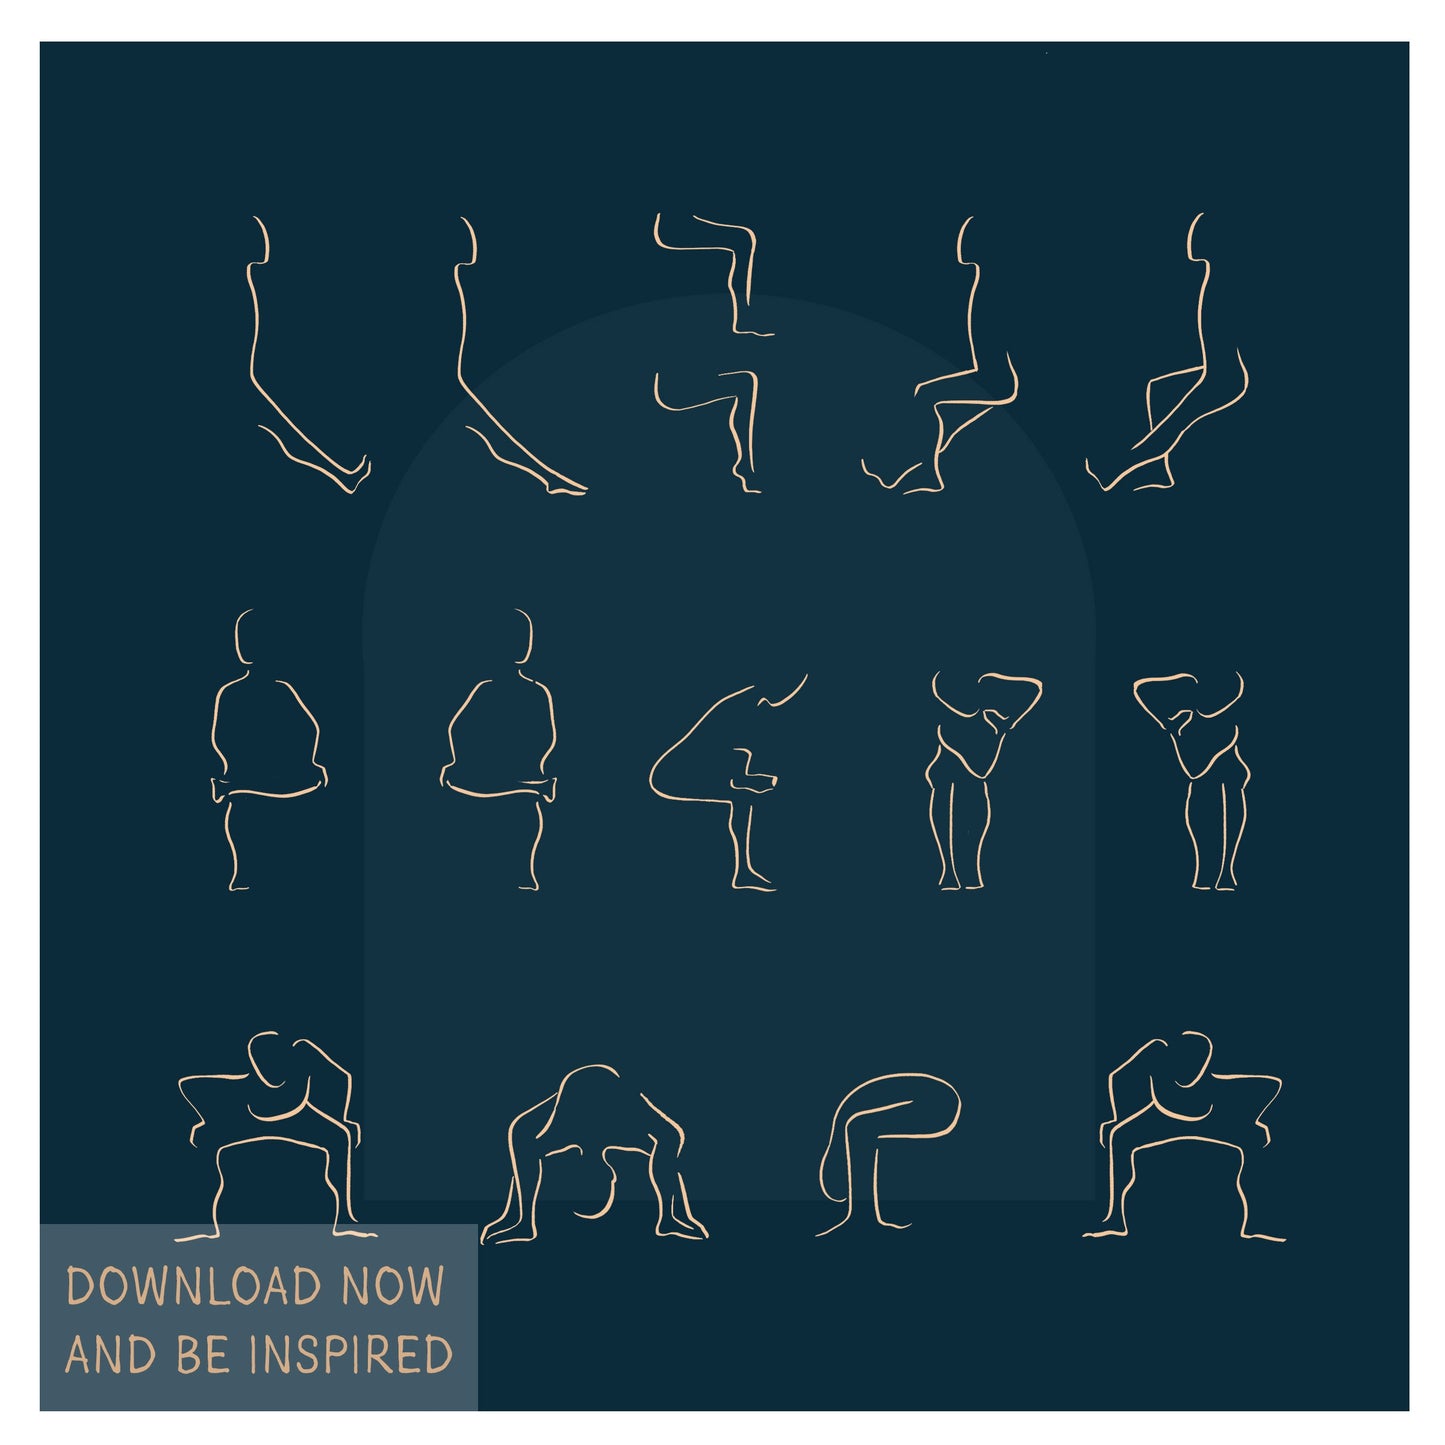 Desk Yoga | Blue | Lower back and body, hips | Minimal | Yoga At Your Desk | Office Yoga | Yoga Print | Yoga Art | 8x8 in, 8x10 in